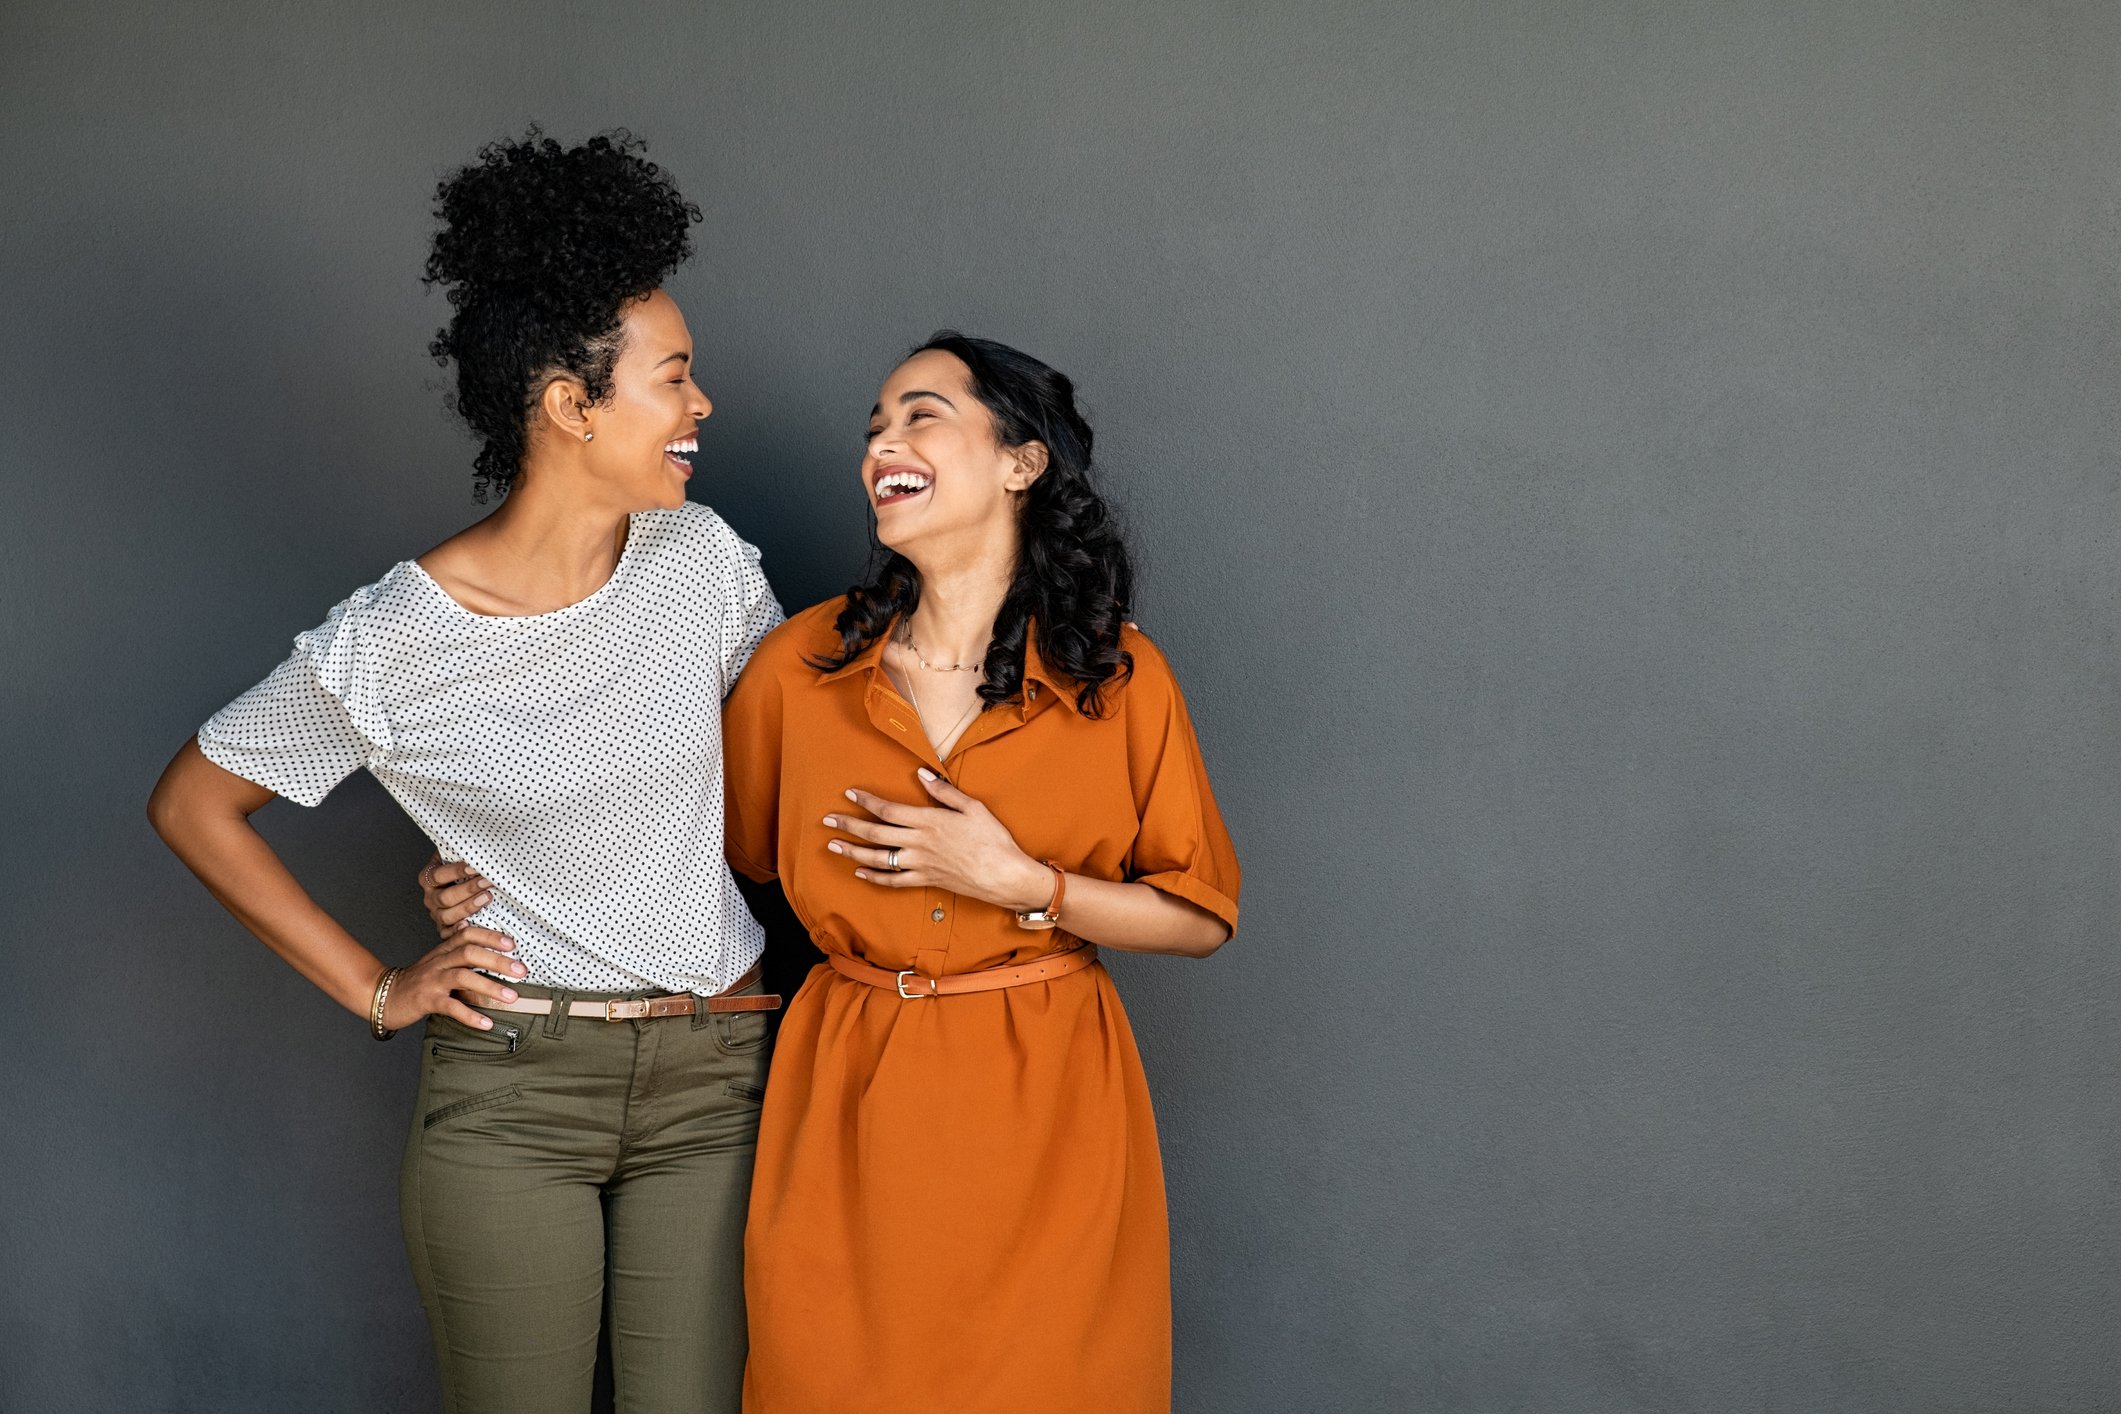 Cultivate Deeper Connections Using the Science of Friendship